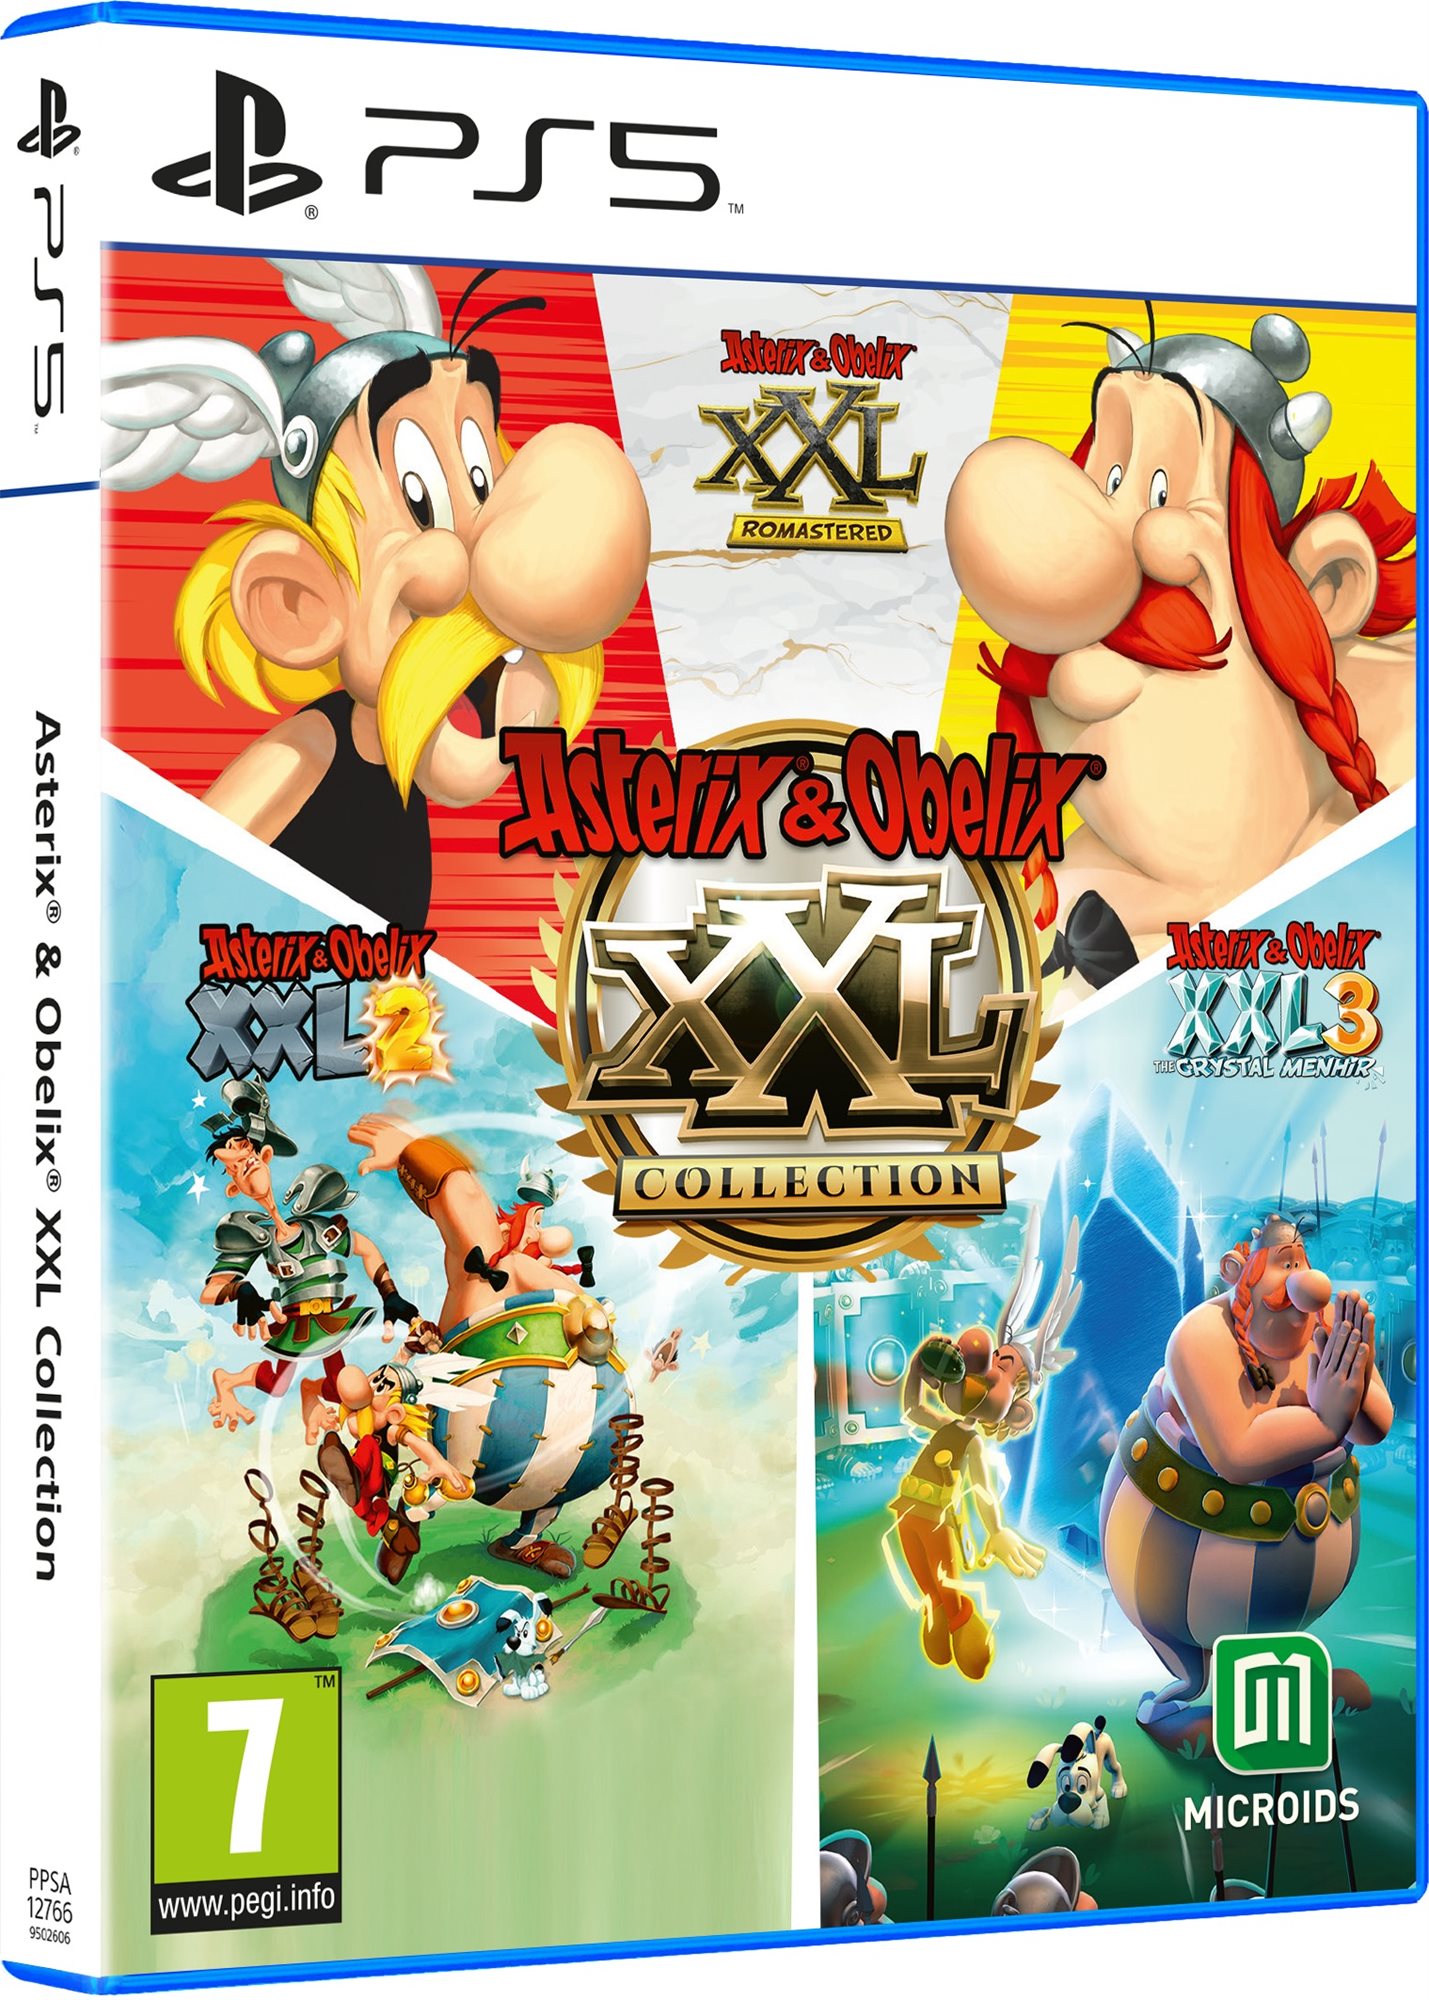 Asterix & Obelix XXL Collection - PS5